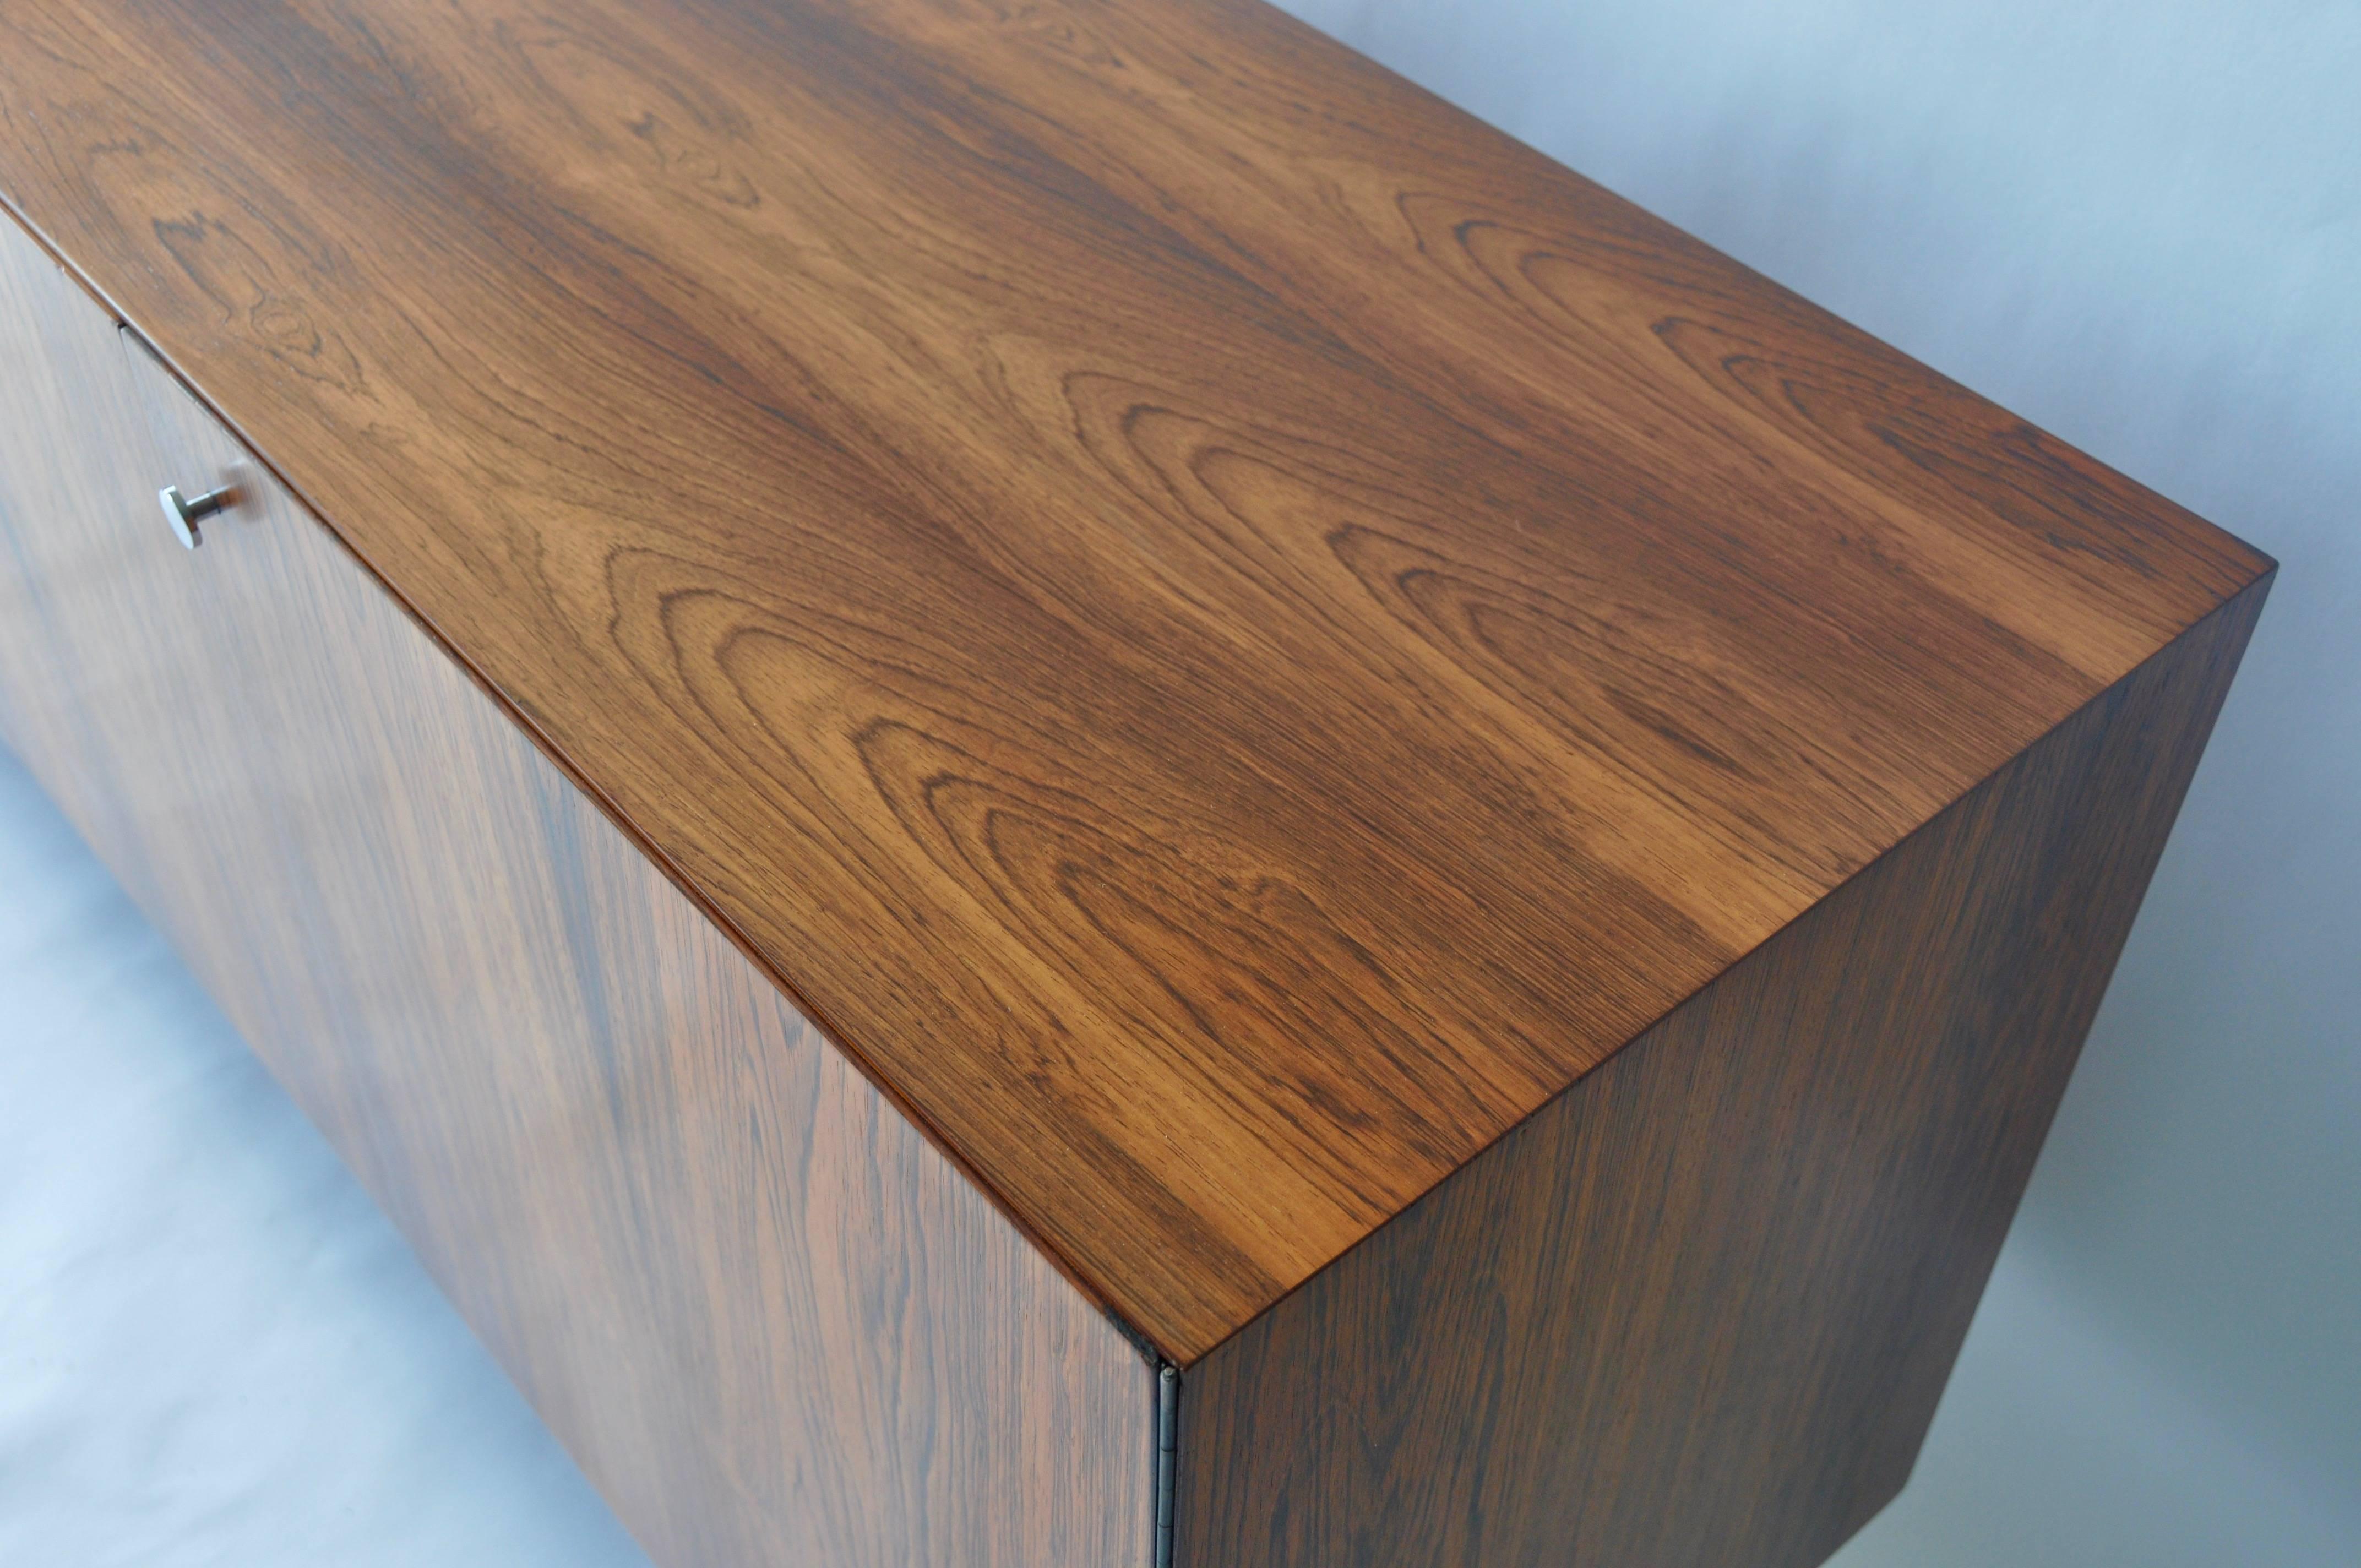 Polished Rosewood Credenza by Poul Norreklit